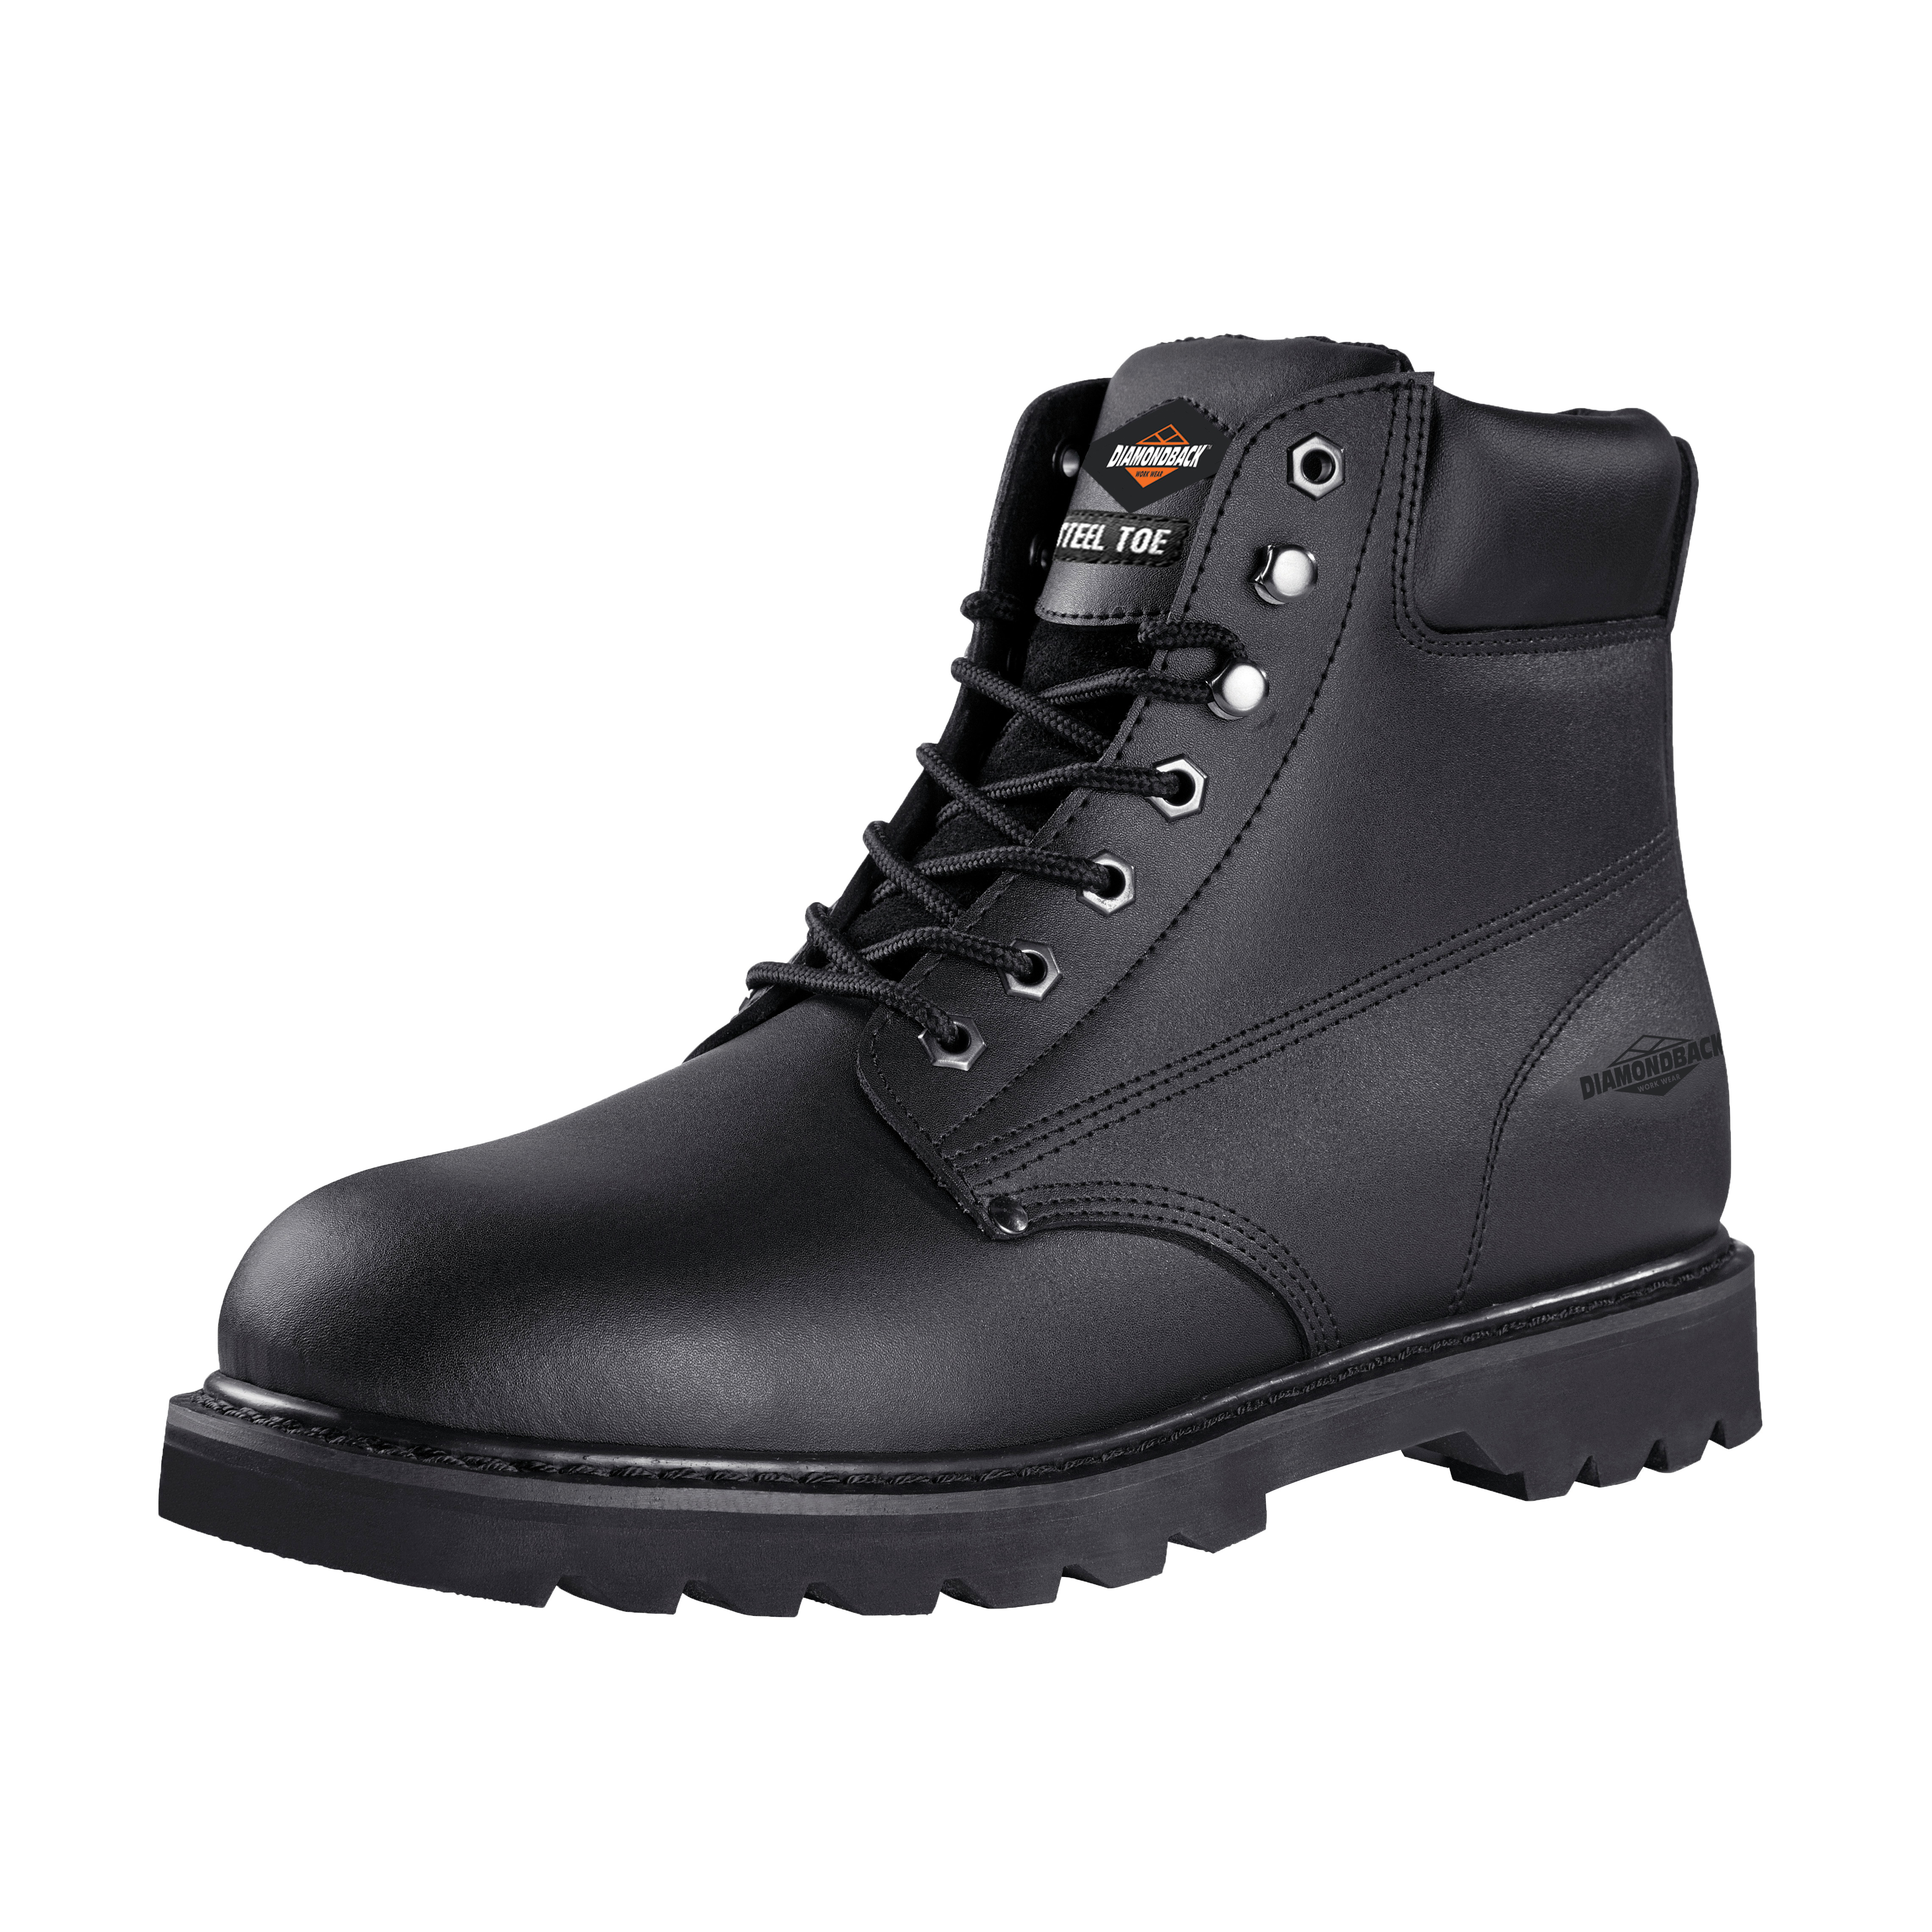 Work Boots, 9.5, Medium W, Black, Leather Upper, Lace-Up, Steel Toe, With Lining